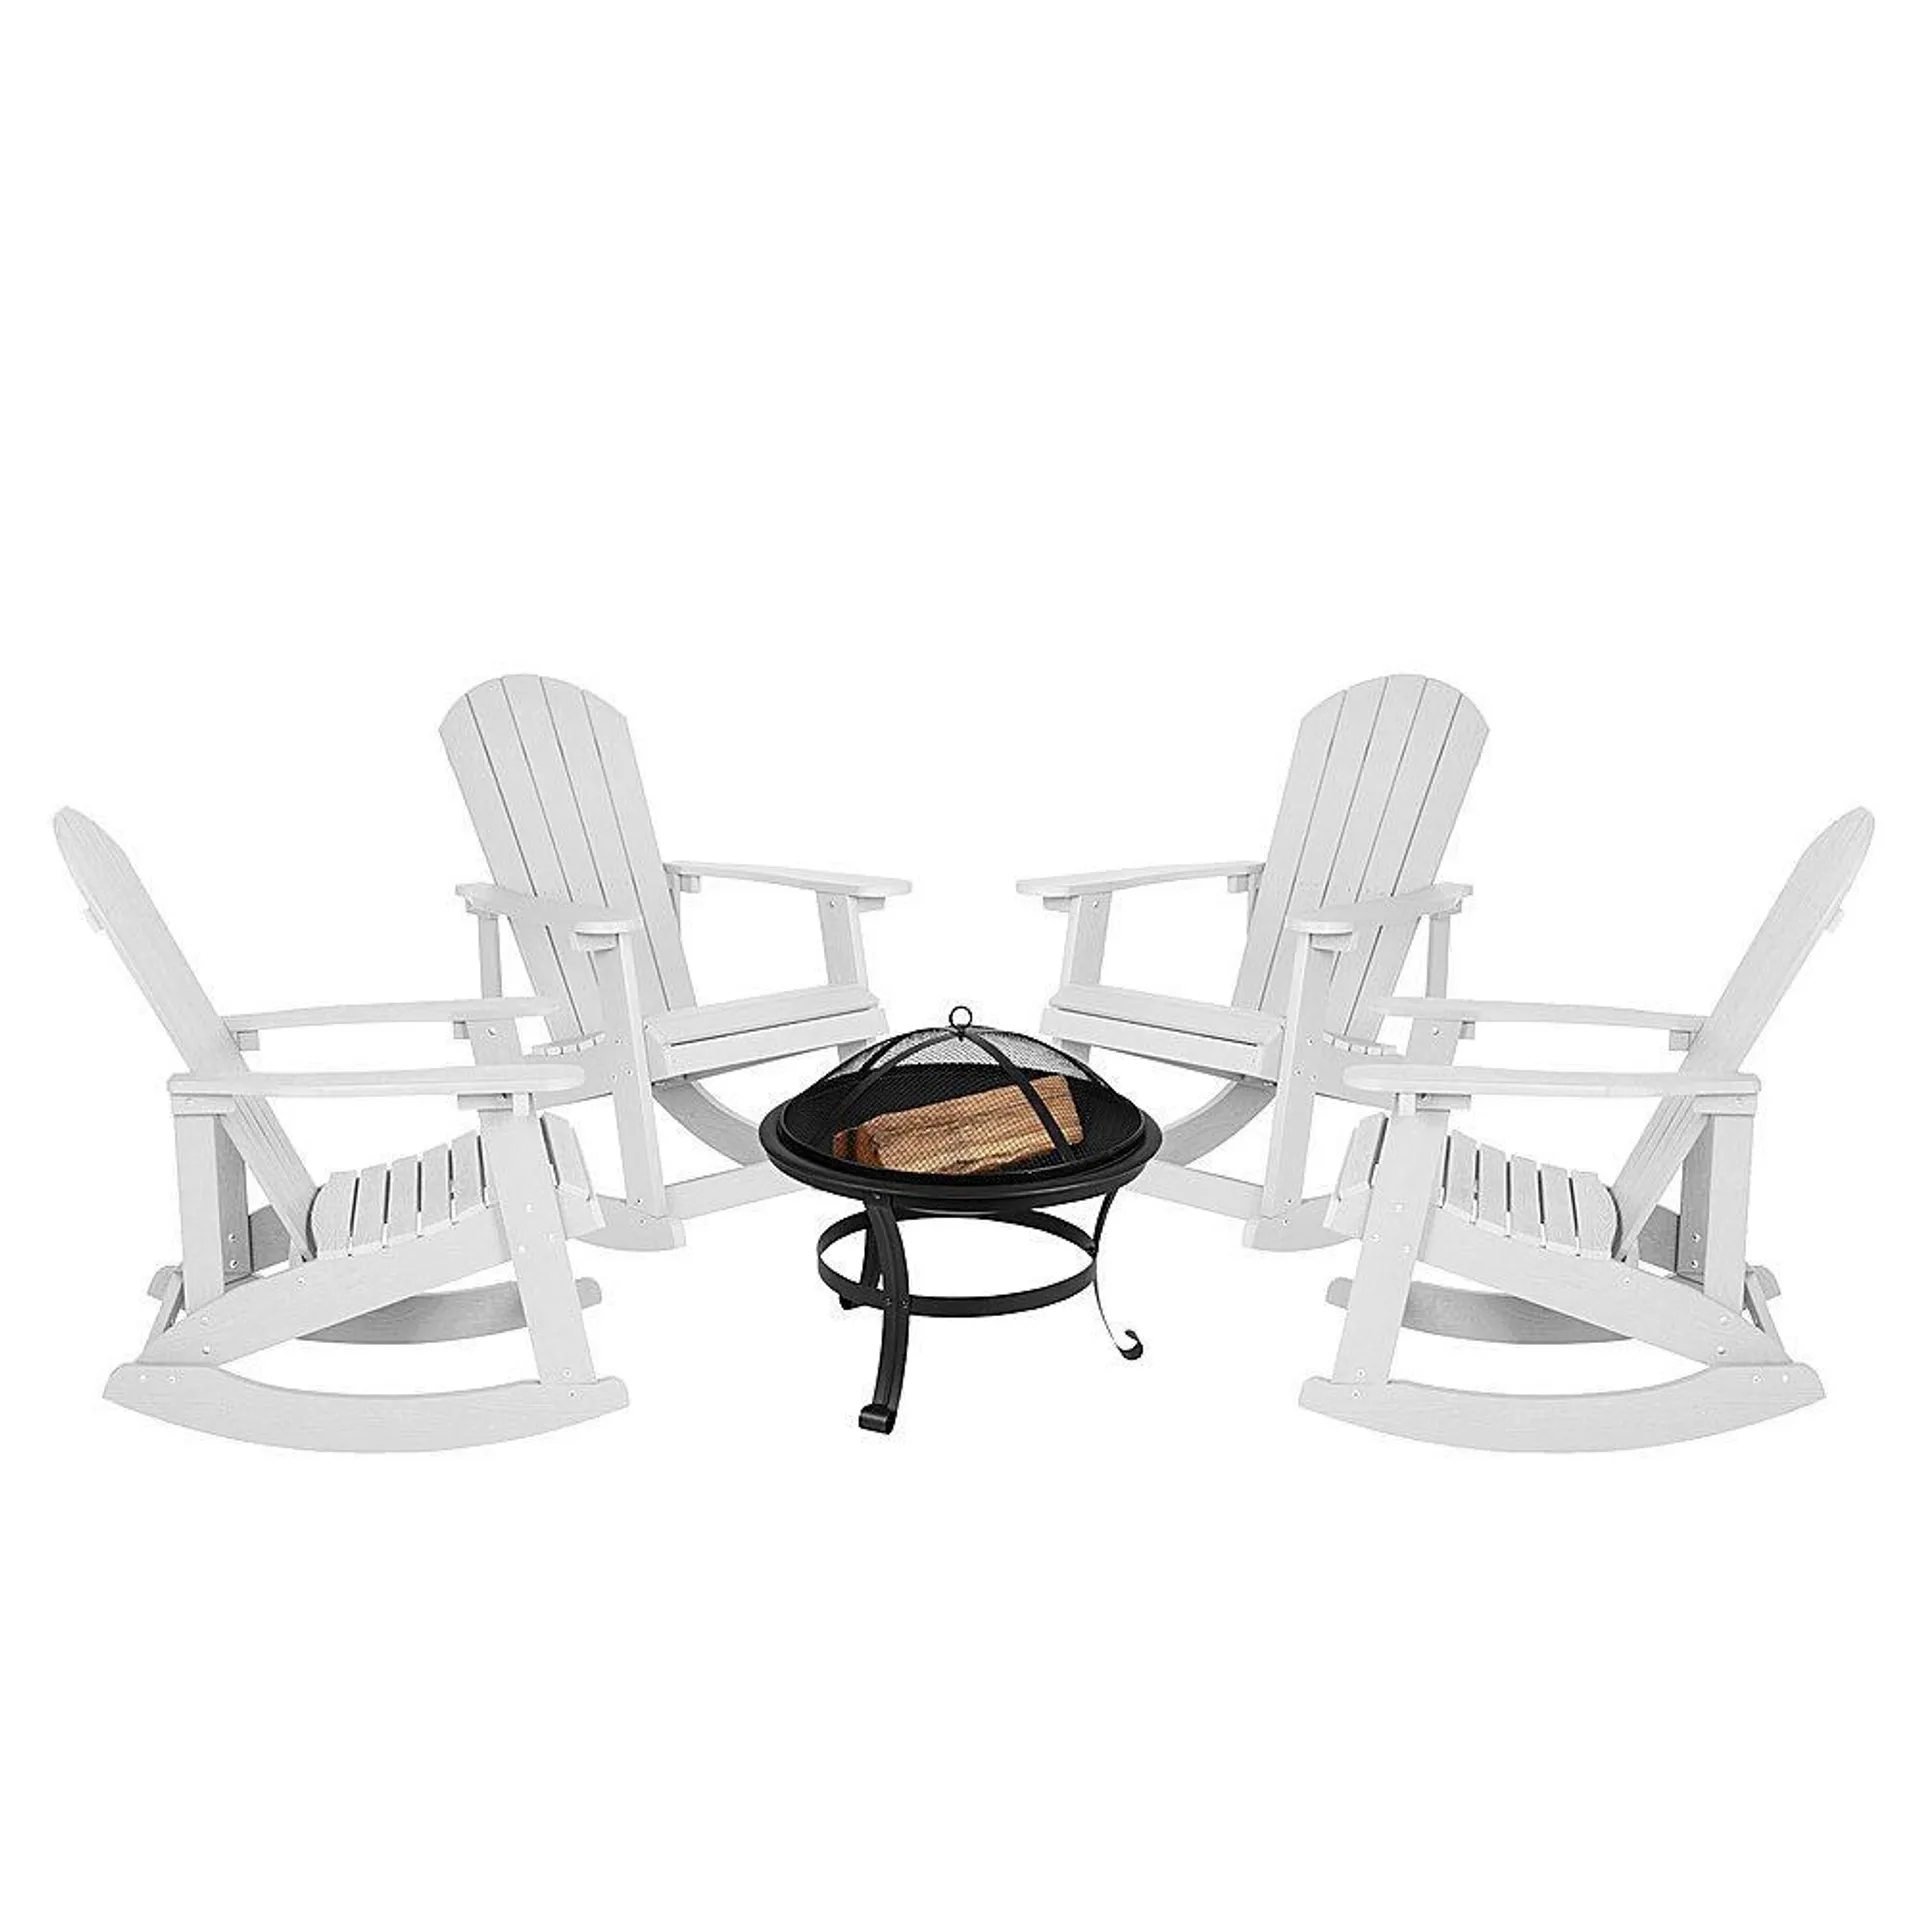 Savannah Rocking Patio Chairs and Fire Pit - White